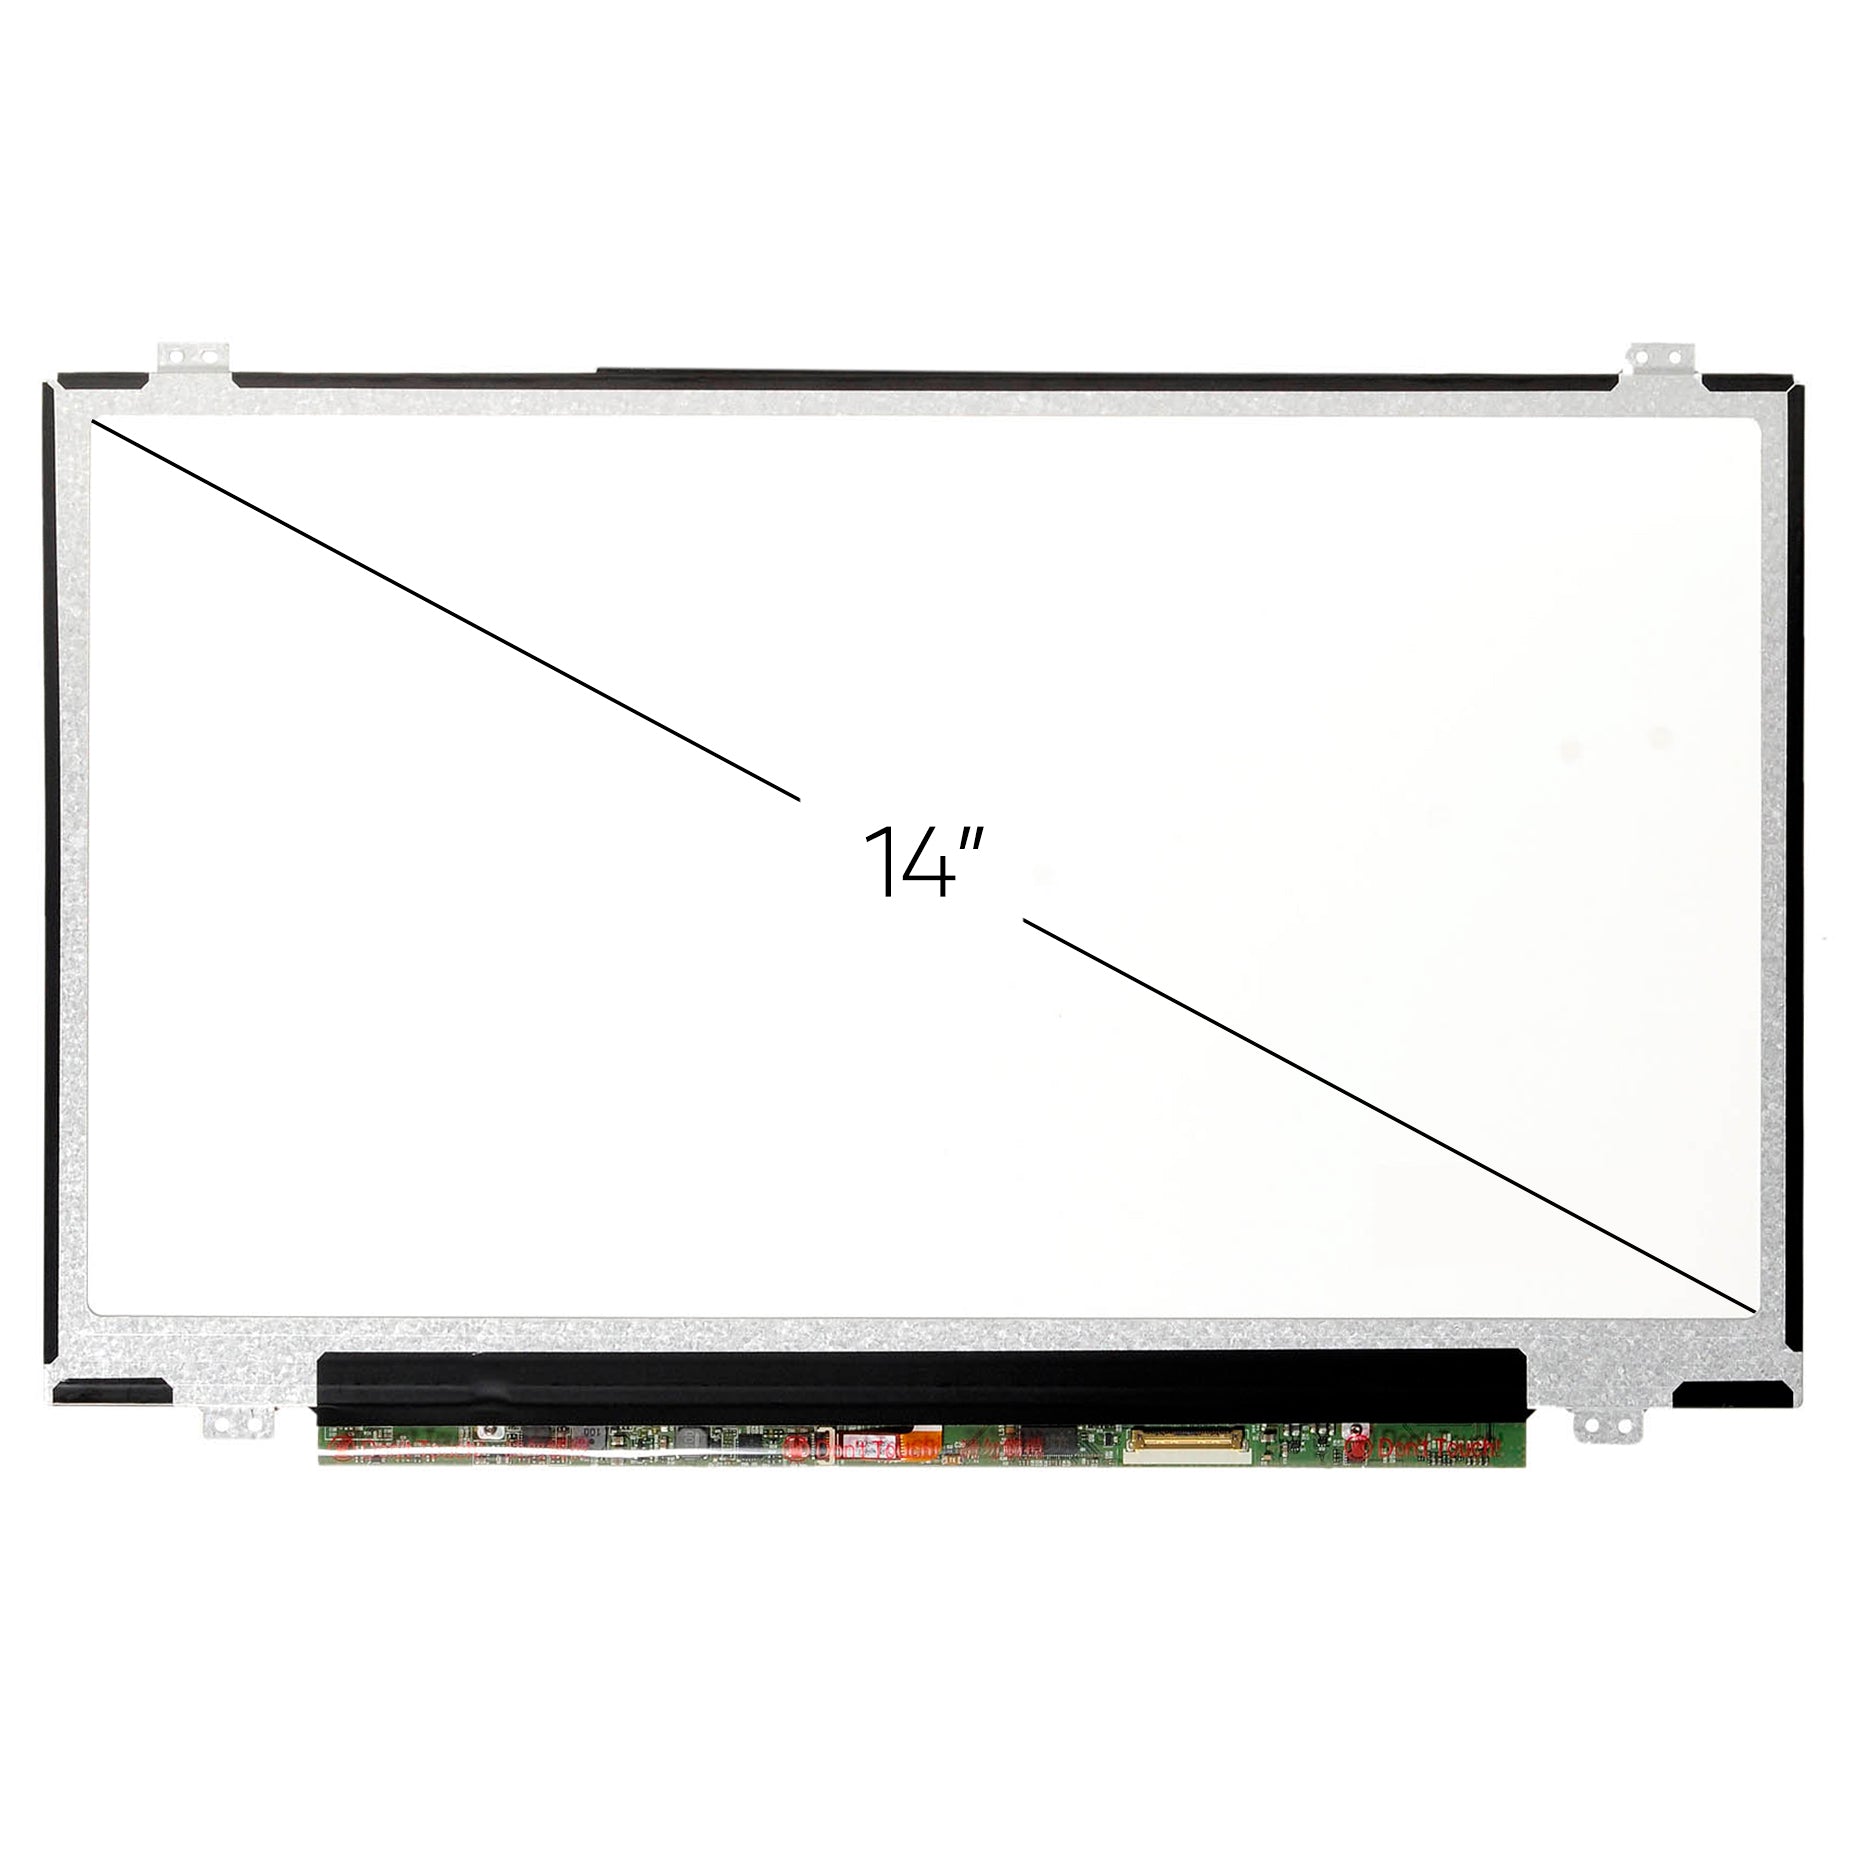 Screen Replacement for Lenovo FRU 00NY673 FHD 1920x1080 IPS Matte LCD LED Display